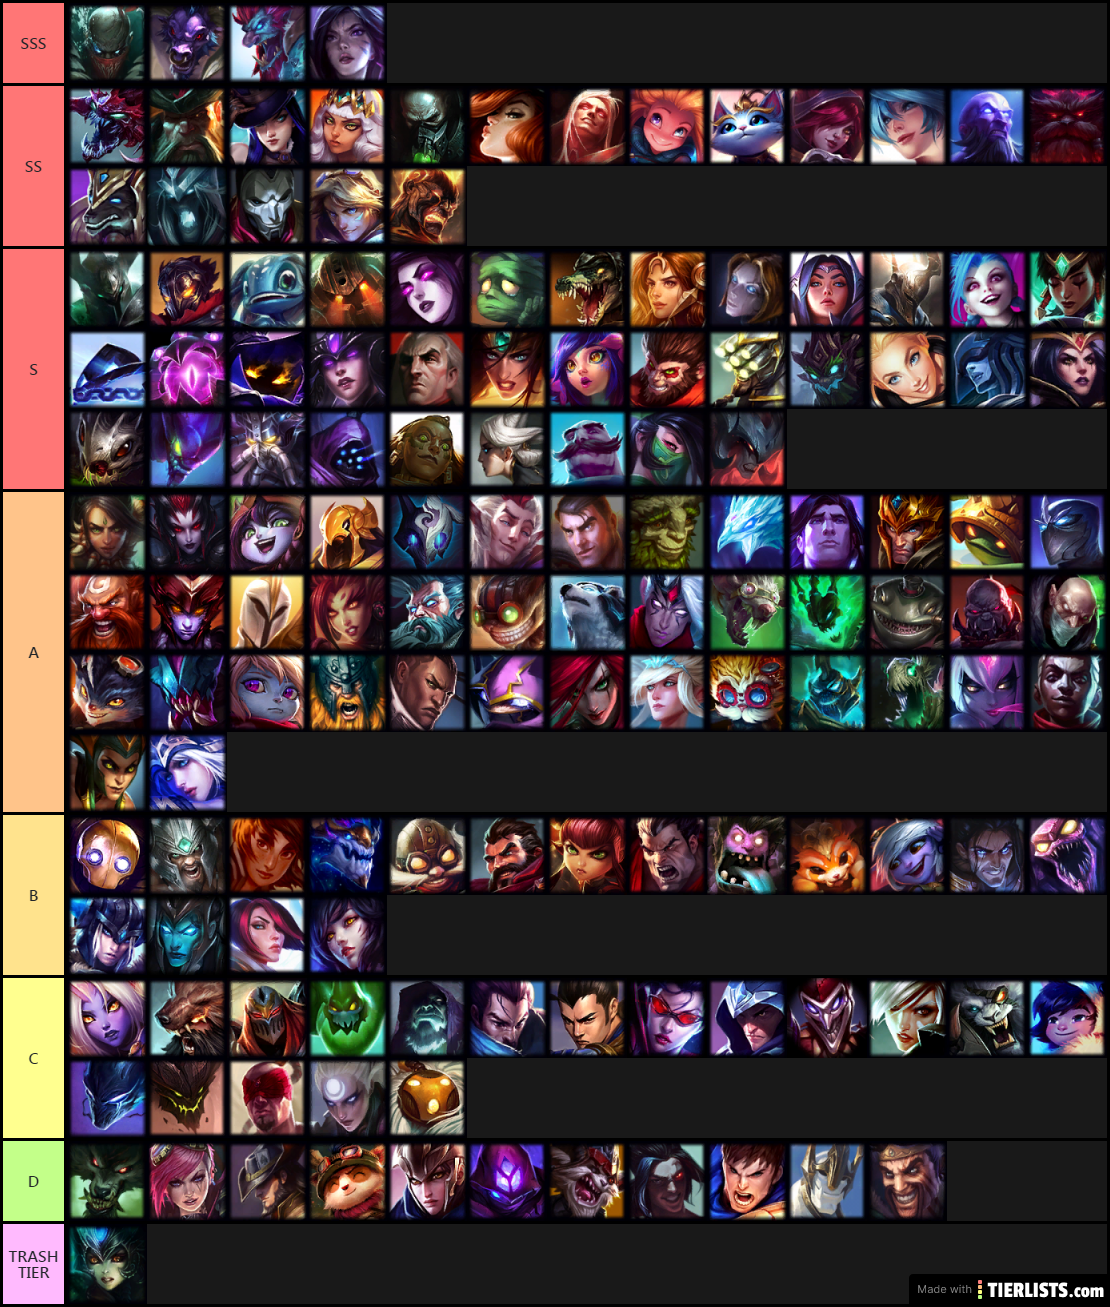 Solo leveling arise tier list weapon. Summoners era тир лист 2022. Summoners era тир лист героев. Tier list героев valorant. Тир лист героев valorant.